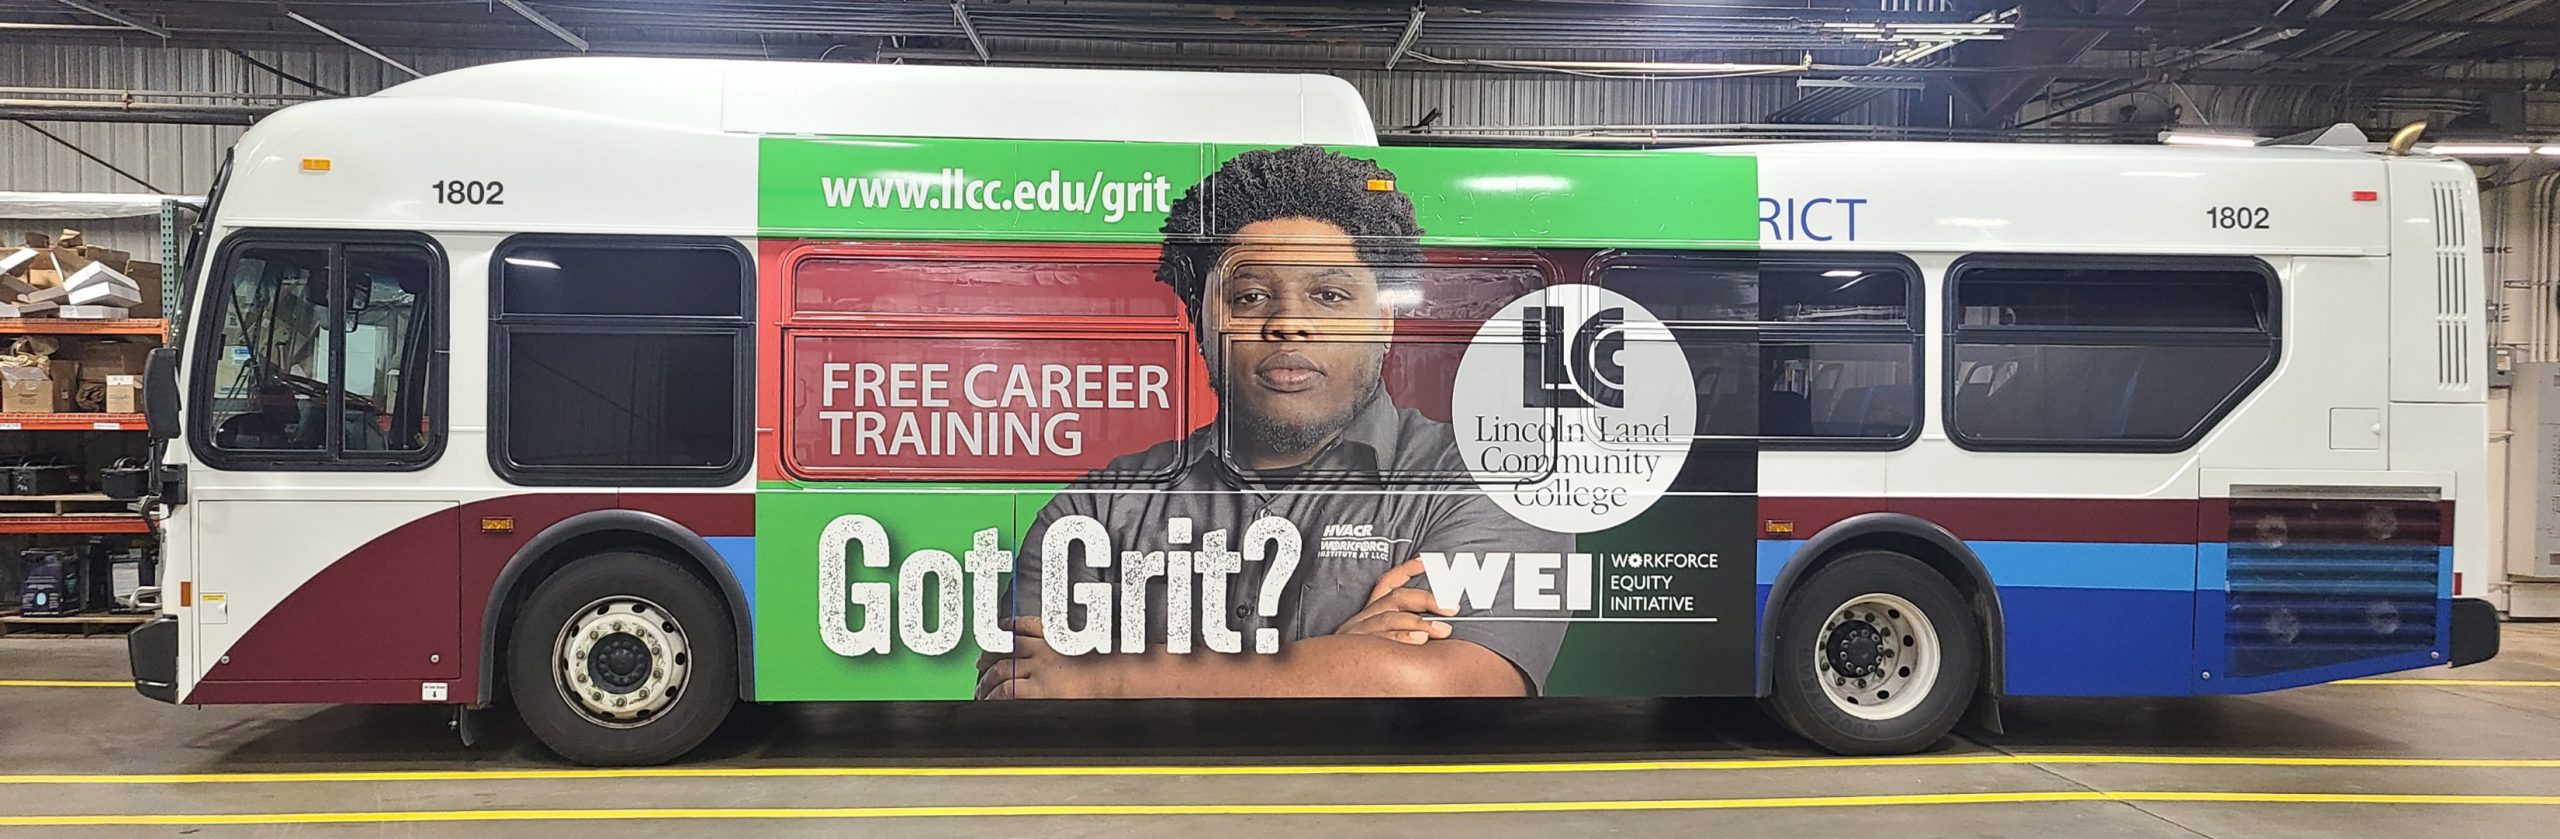 Side of bus with WEI Workforce Equity Initiative ad. www.llcc.edu/grit. Free career training. Got Grit? LLCC. Lincoln Land Community College.